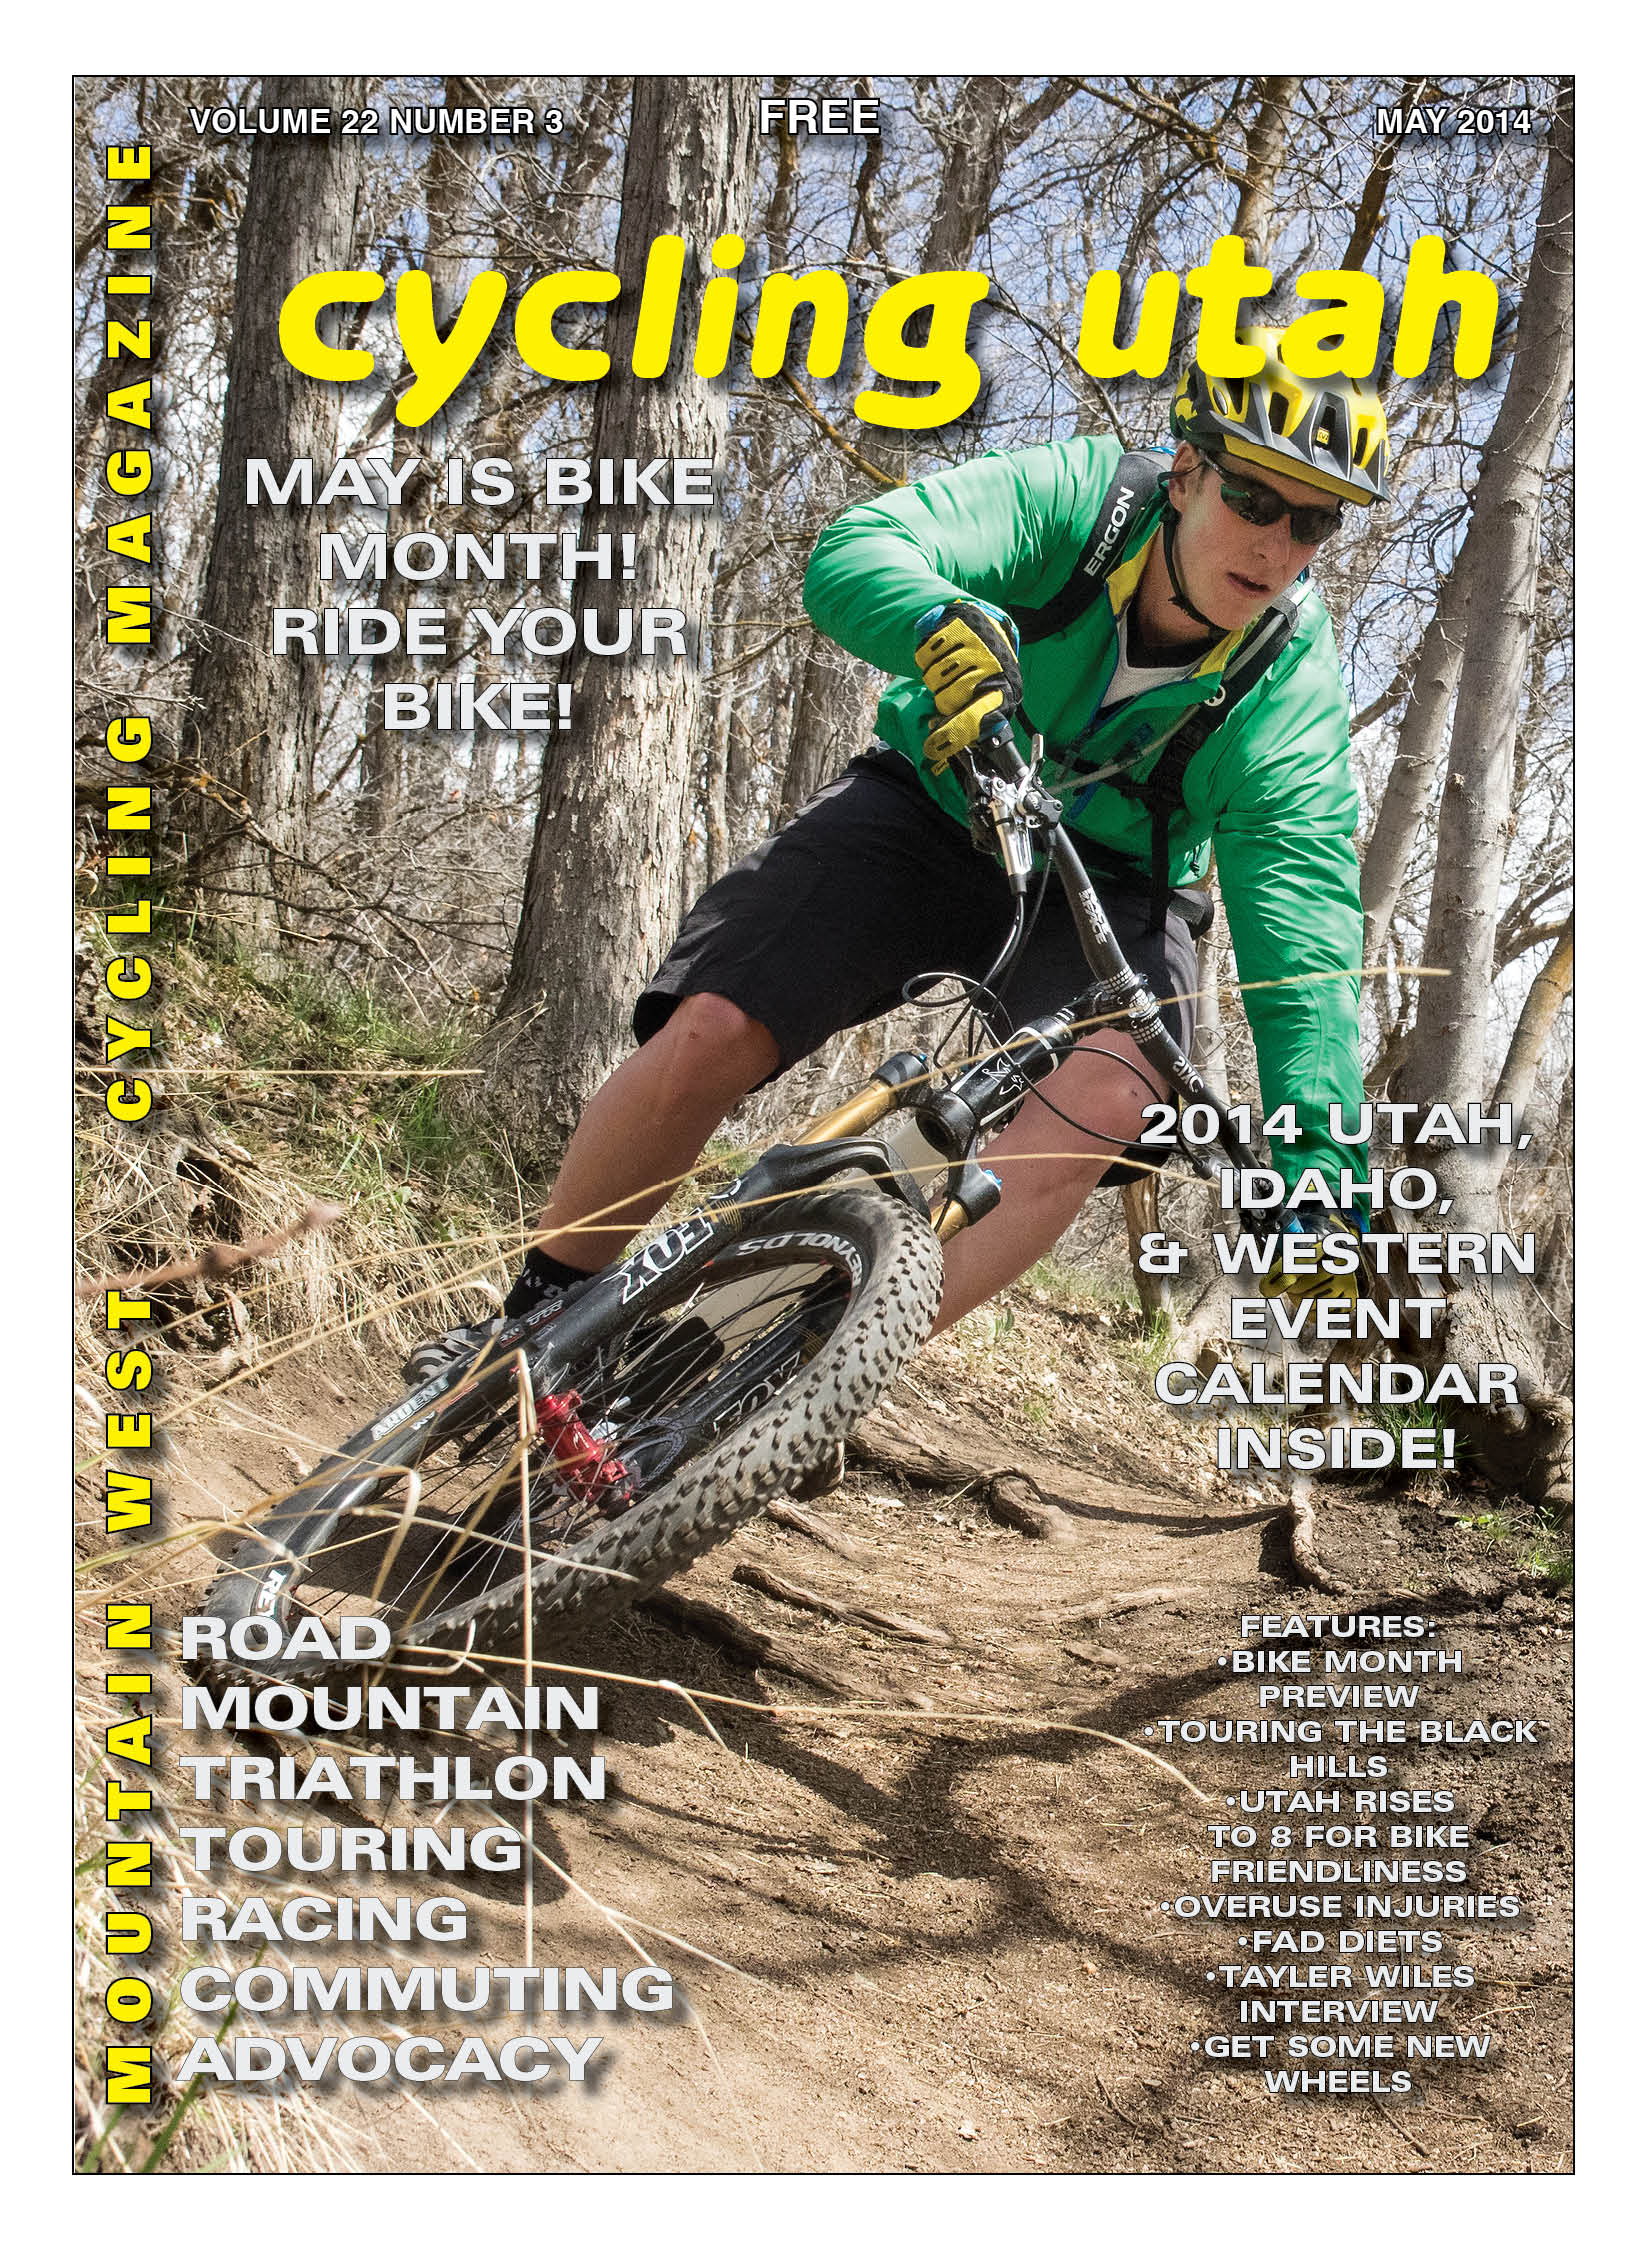 Cycling Utah’s May 2014 Issue is Now Available!